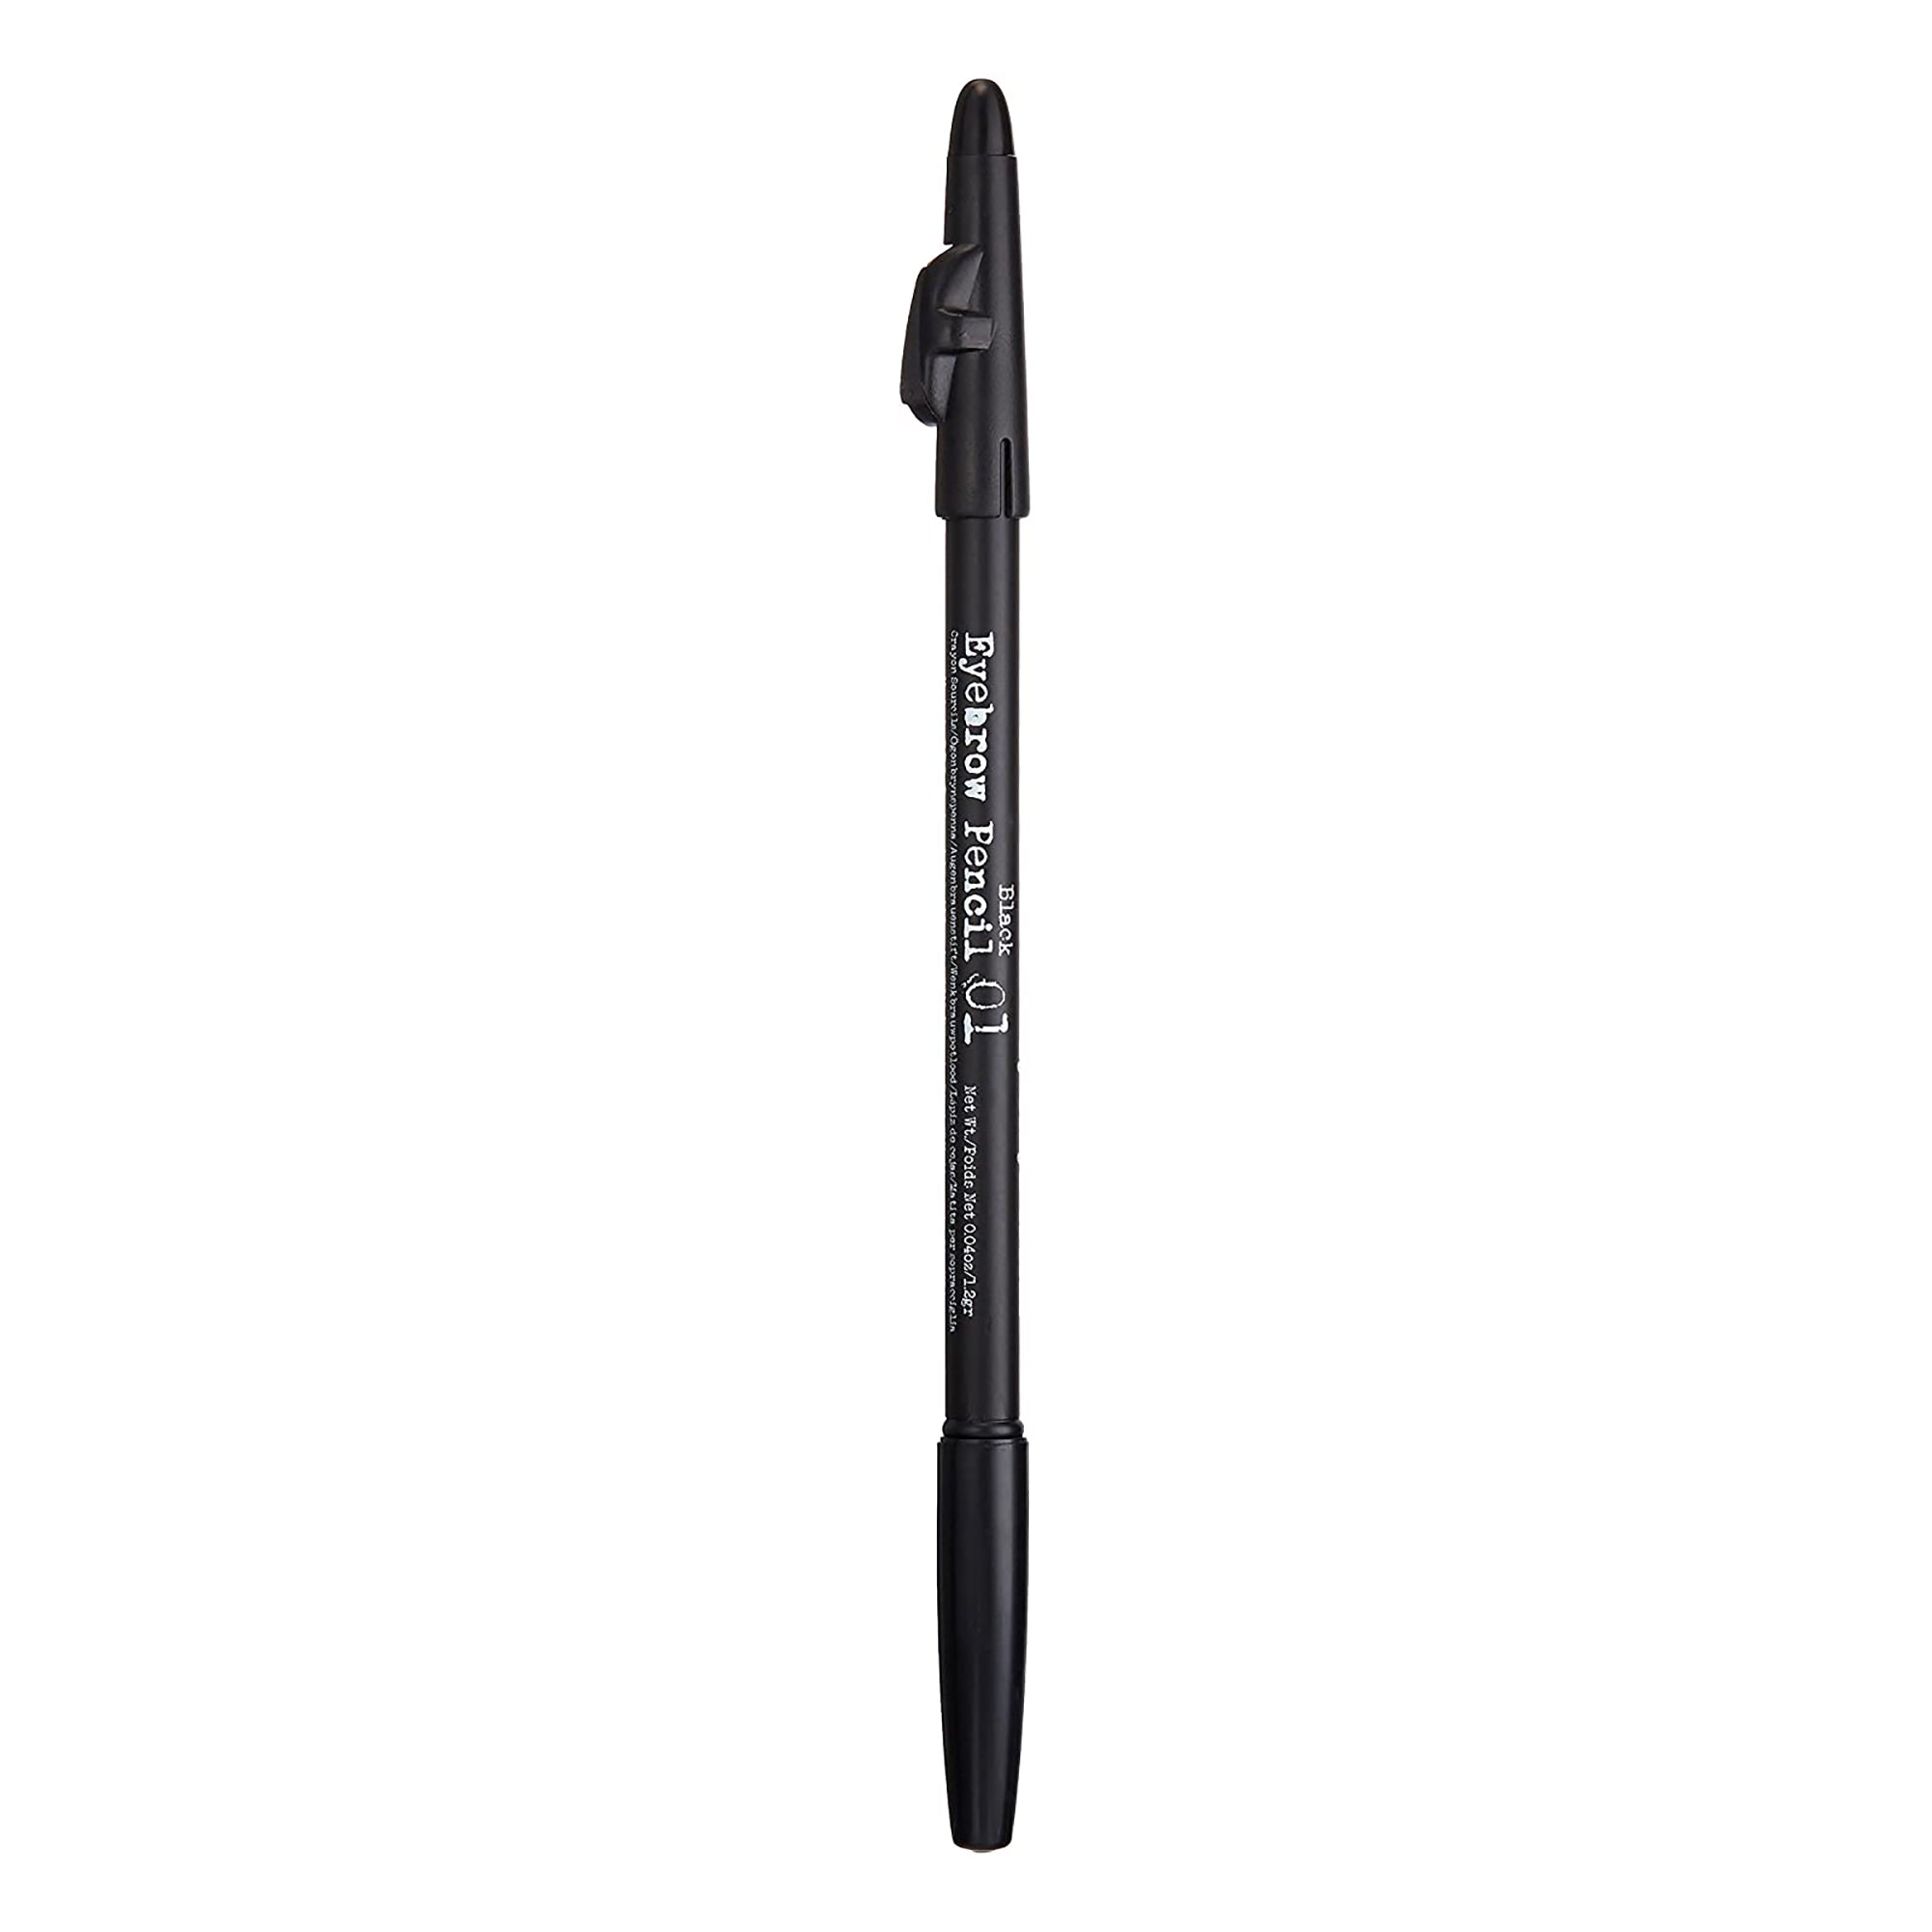 The BrowGal Skinny Eyebrow Pencil Black Color